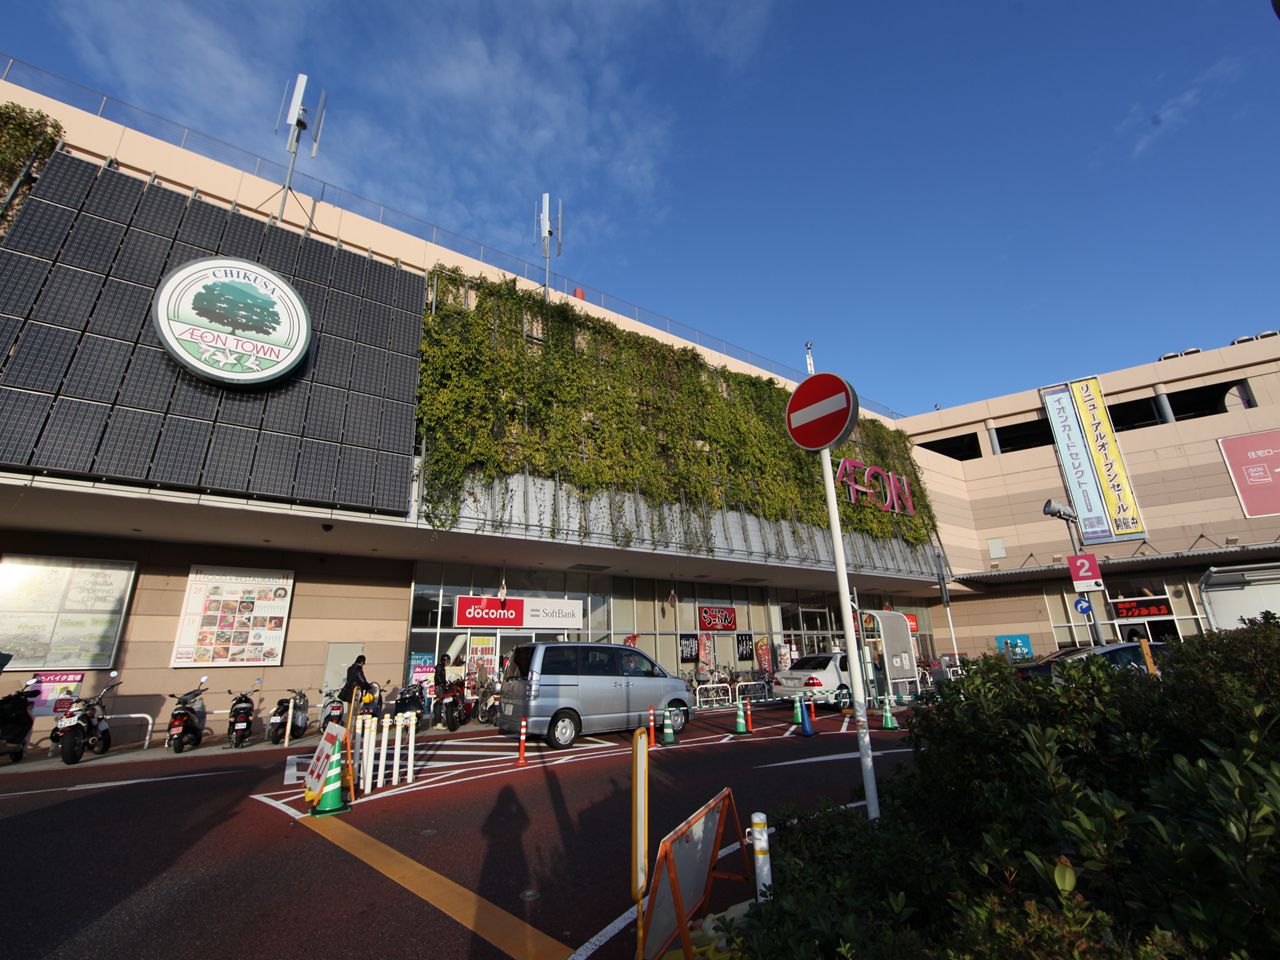 Shopping centre. 444m to Chikusa ion Town (shopping center)